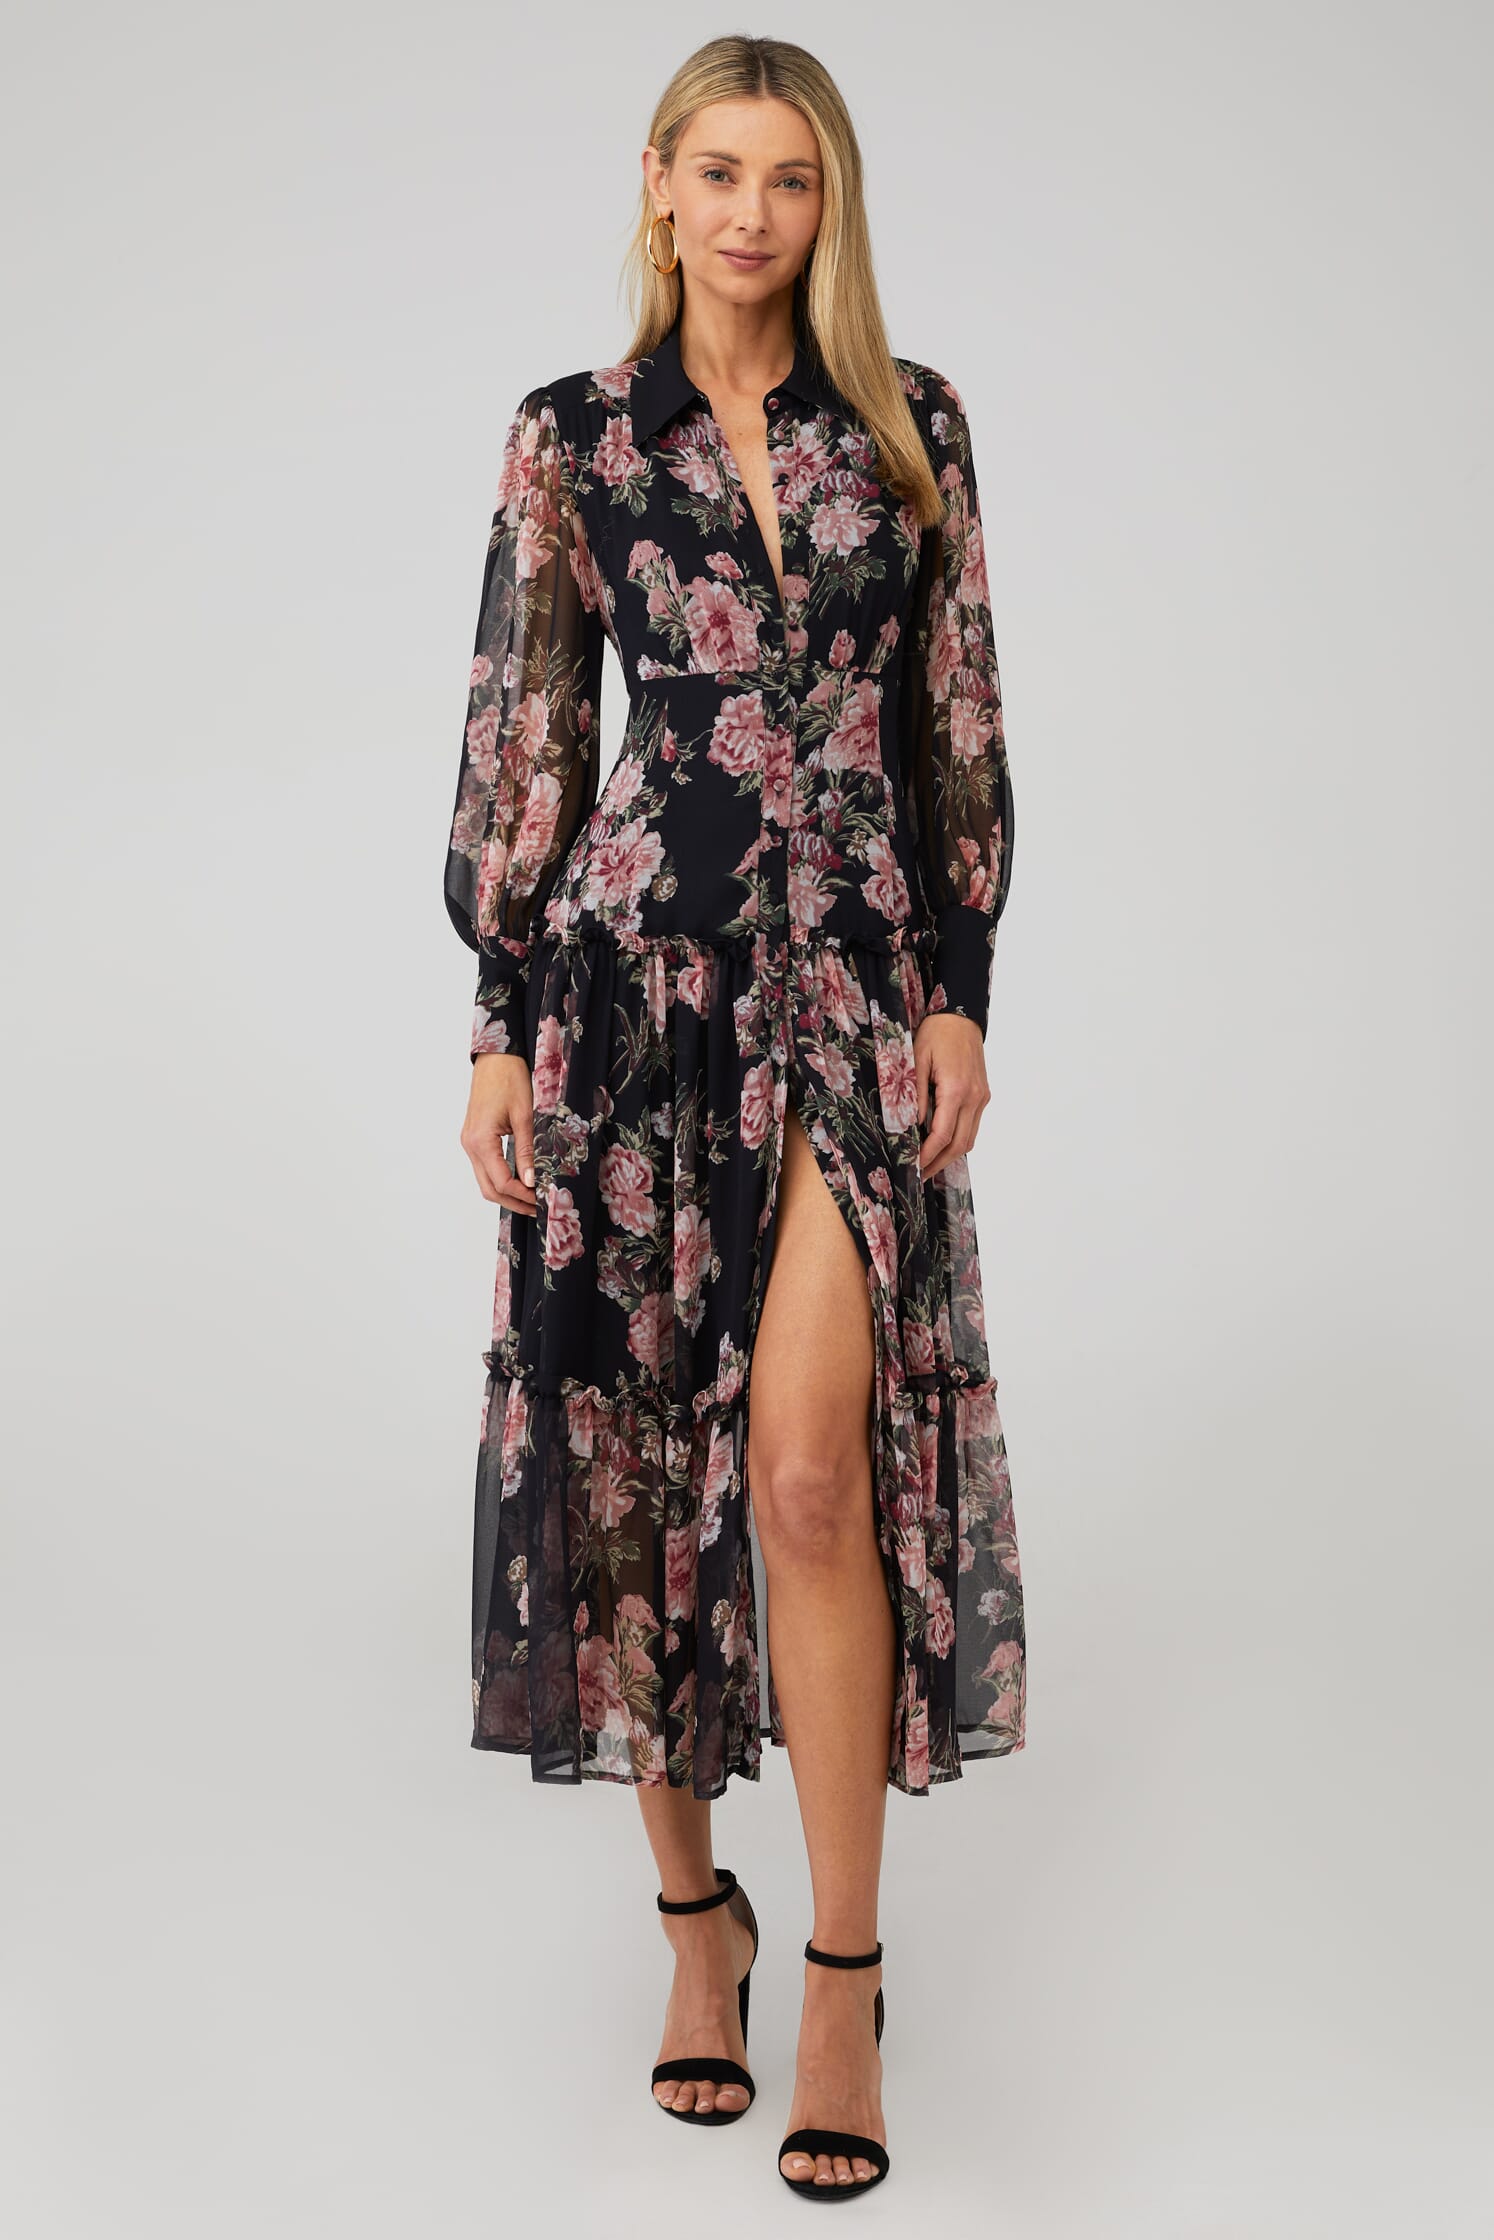 Bardot | Navy Floral Dress in Navy/Floral| FashionPass